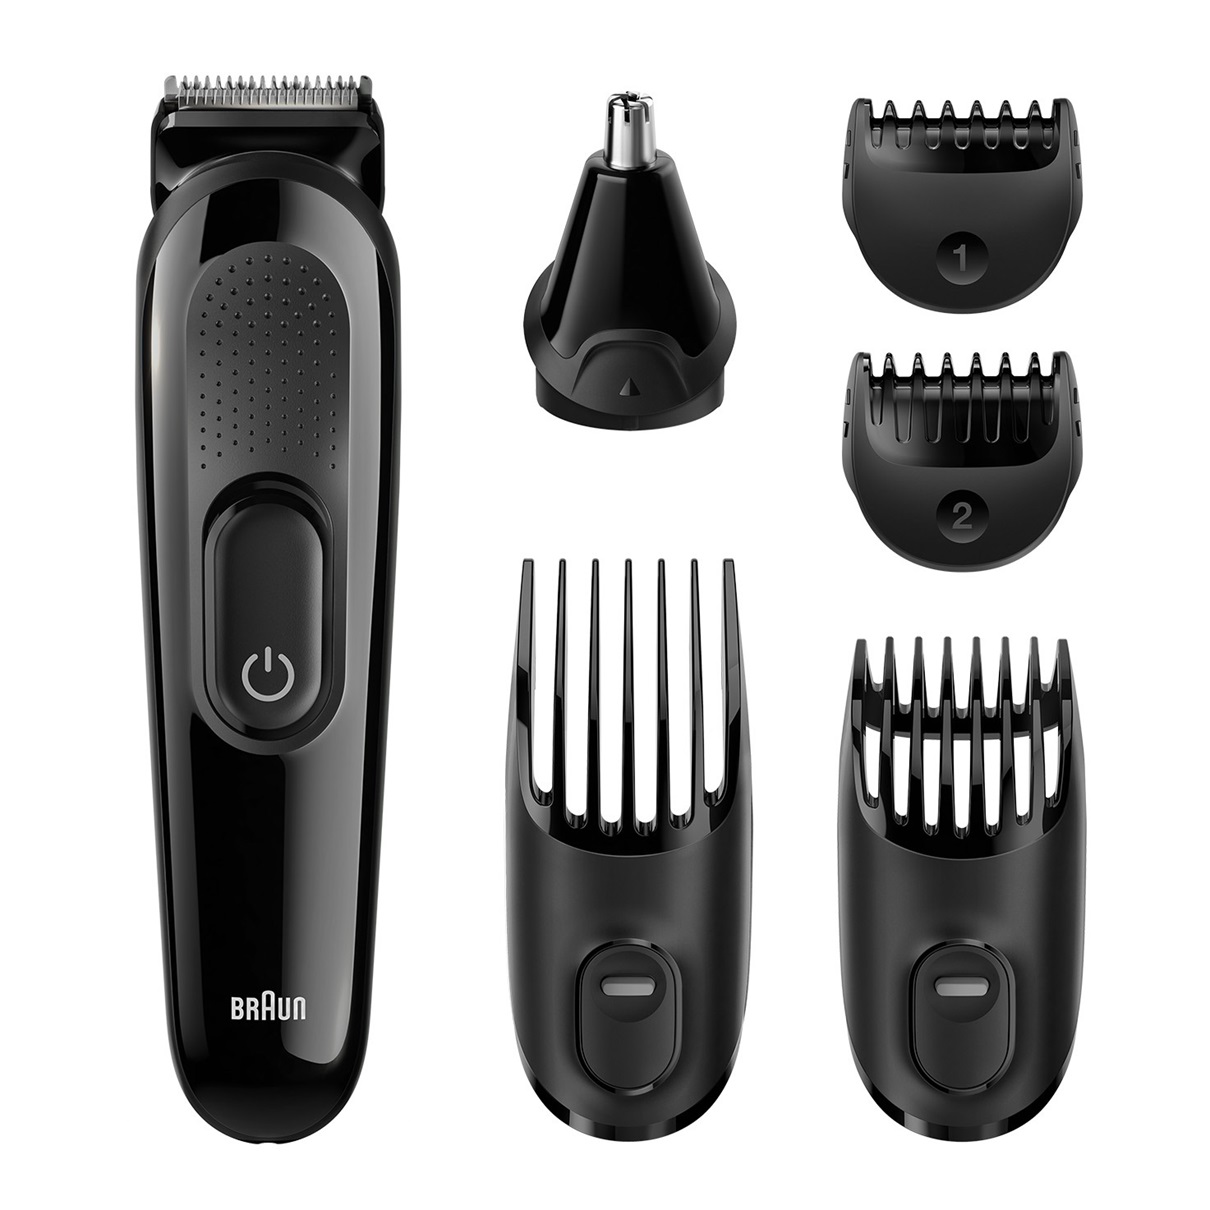 philips hair shaver for mens